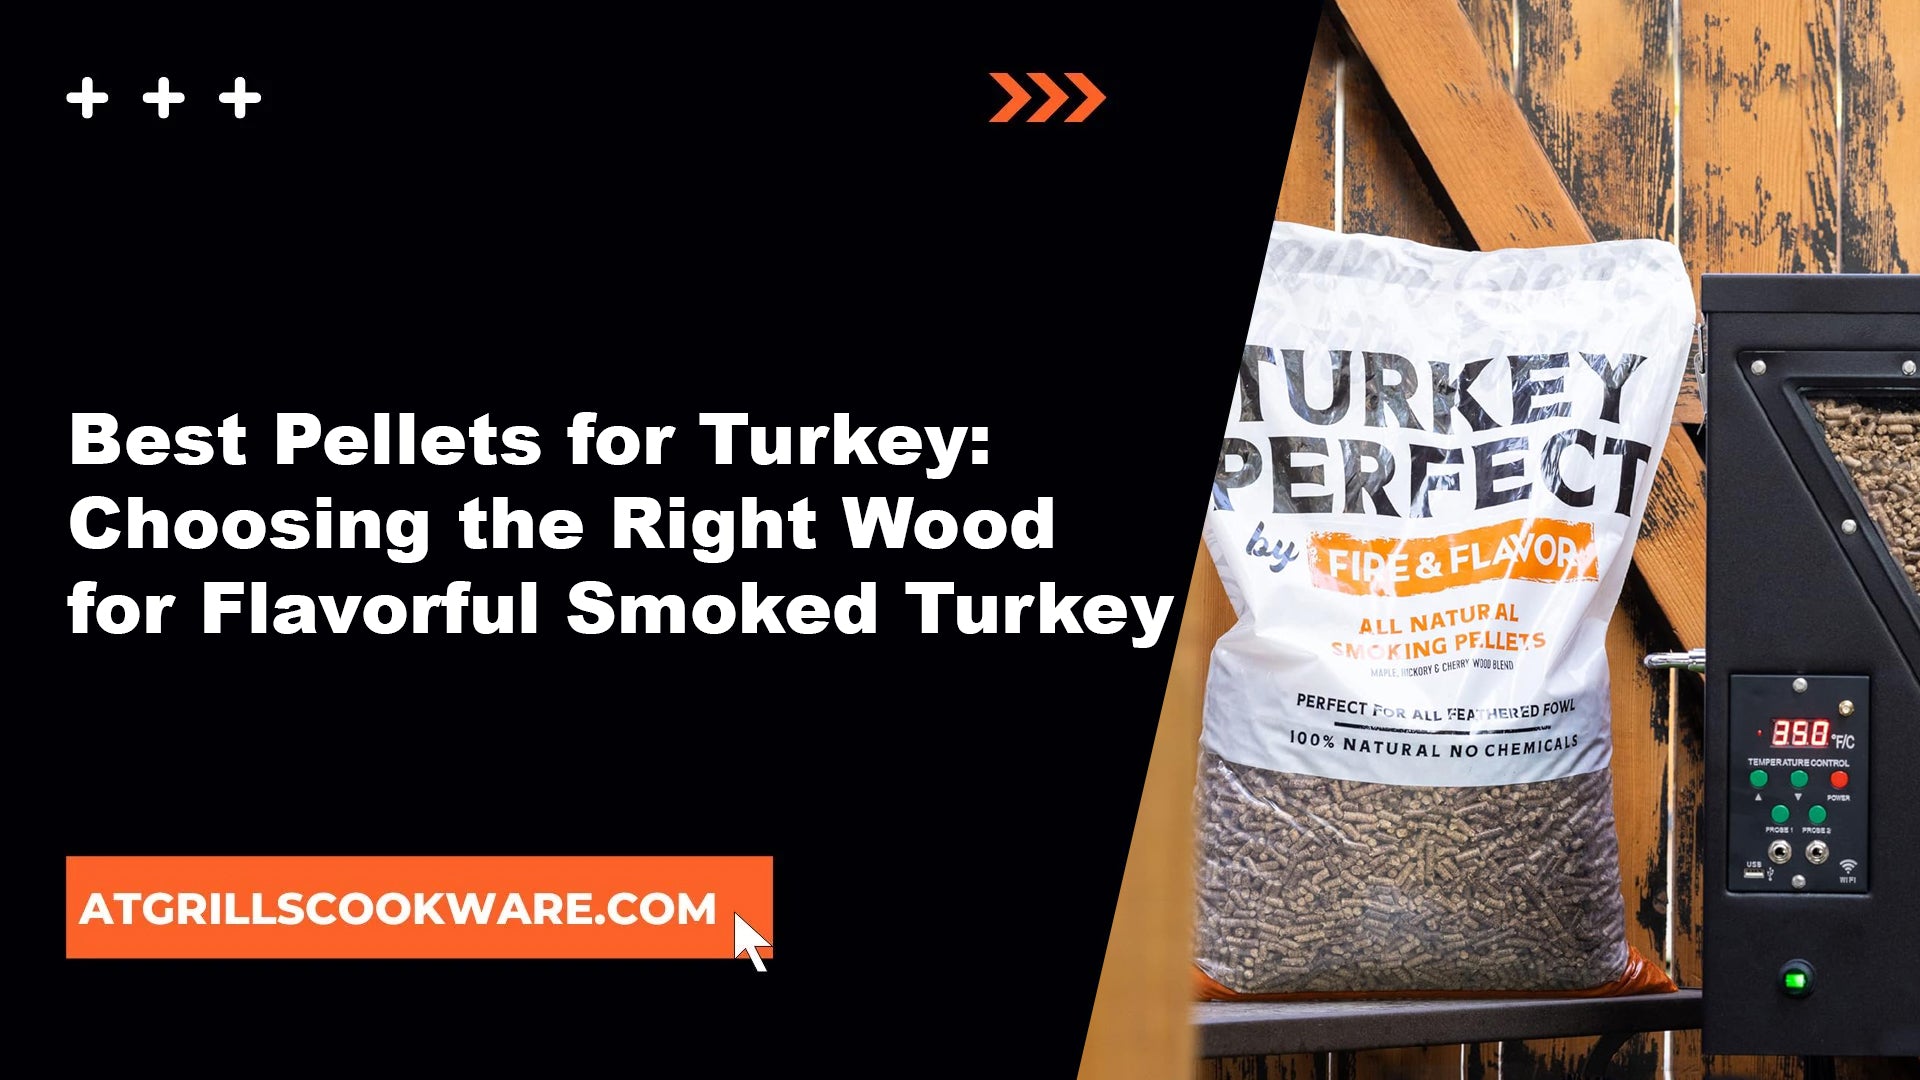 Best Pellets for Turkey: Choosing the Right Wood for Flavorful Smoked Turkey